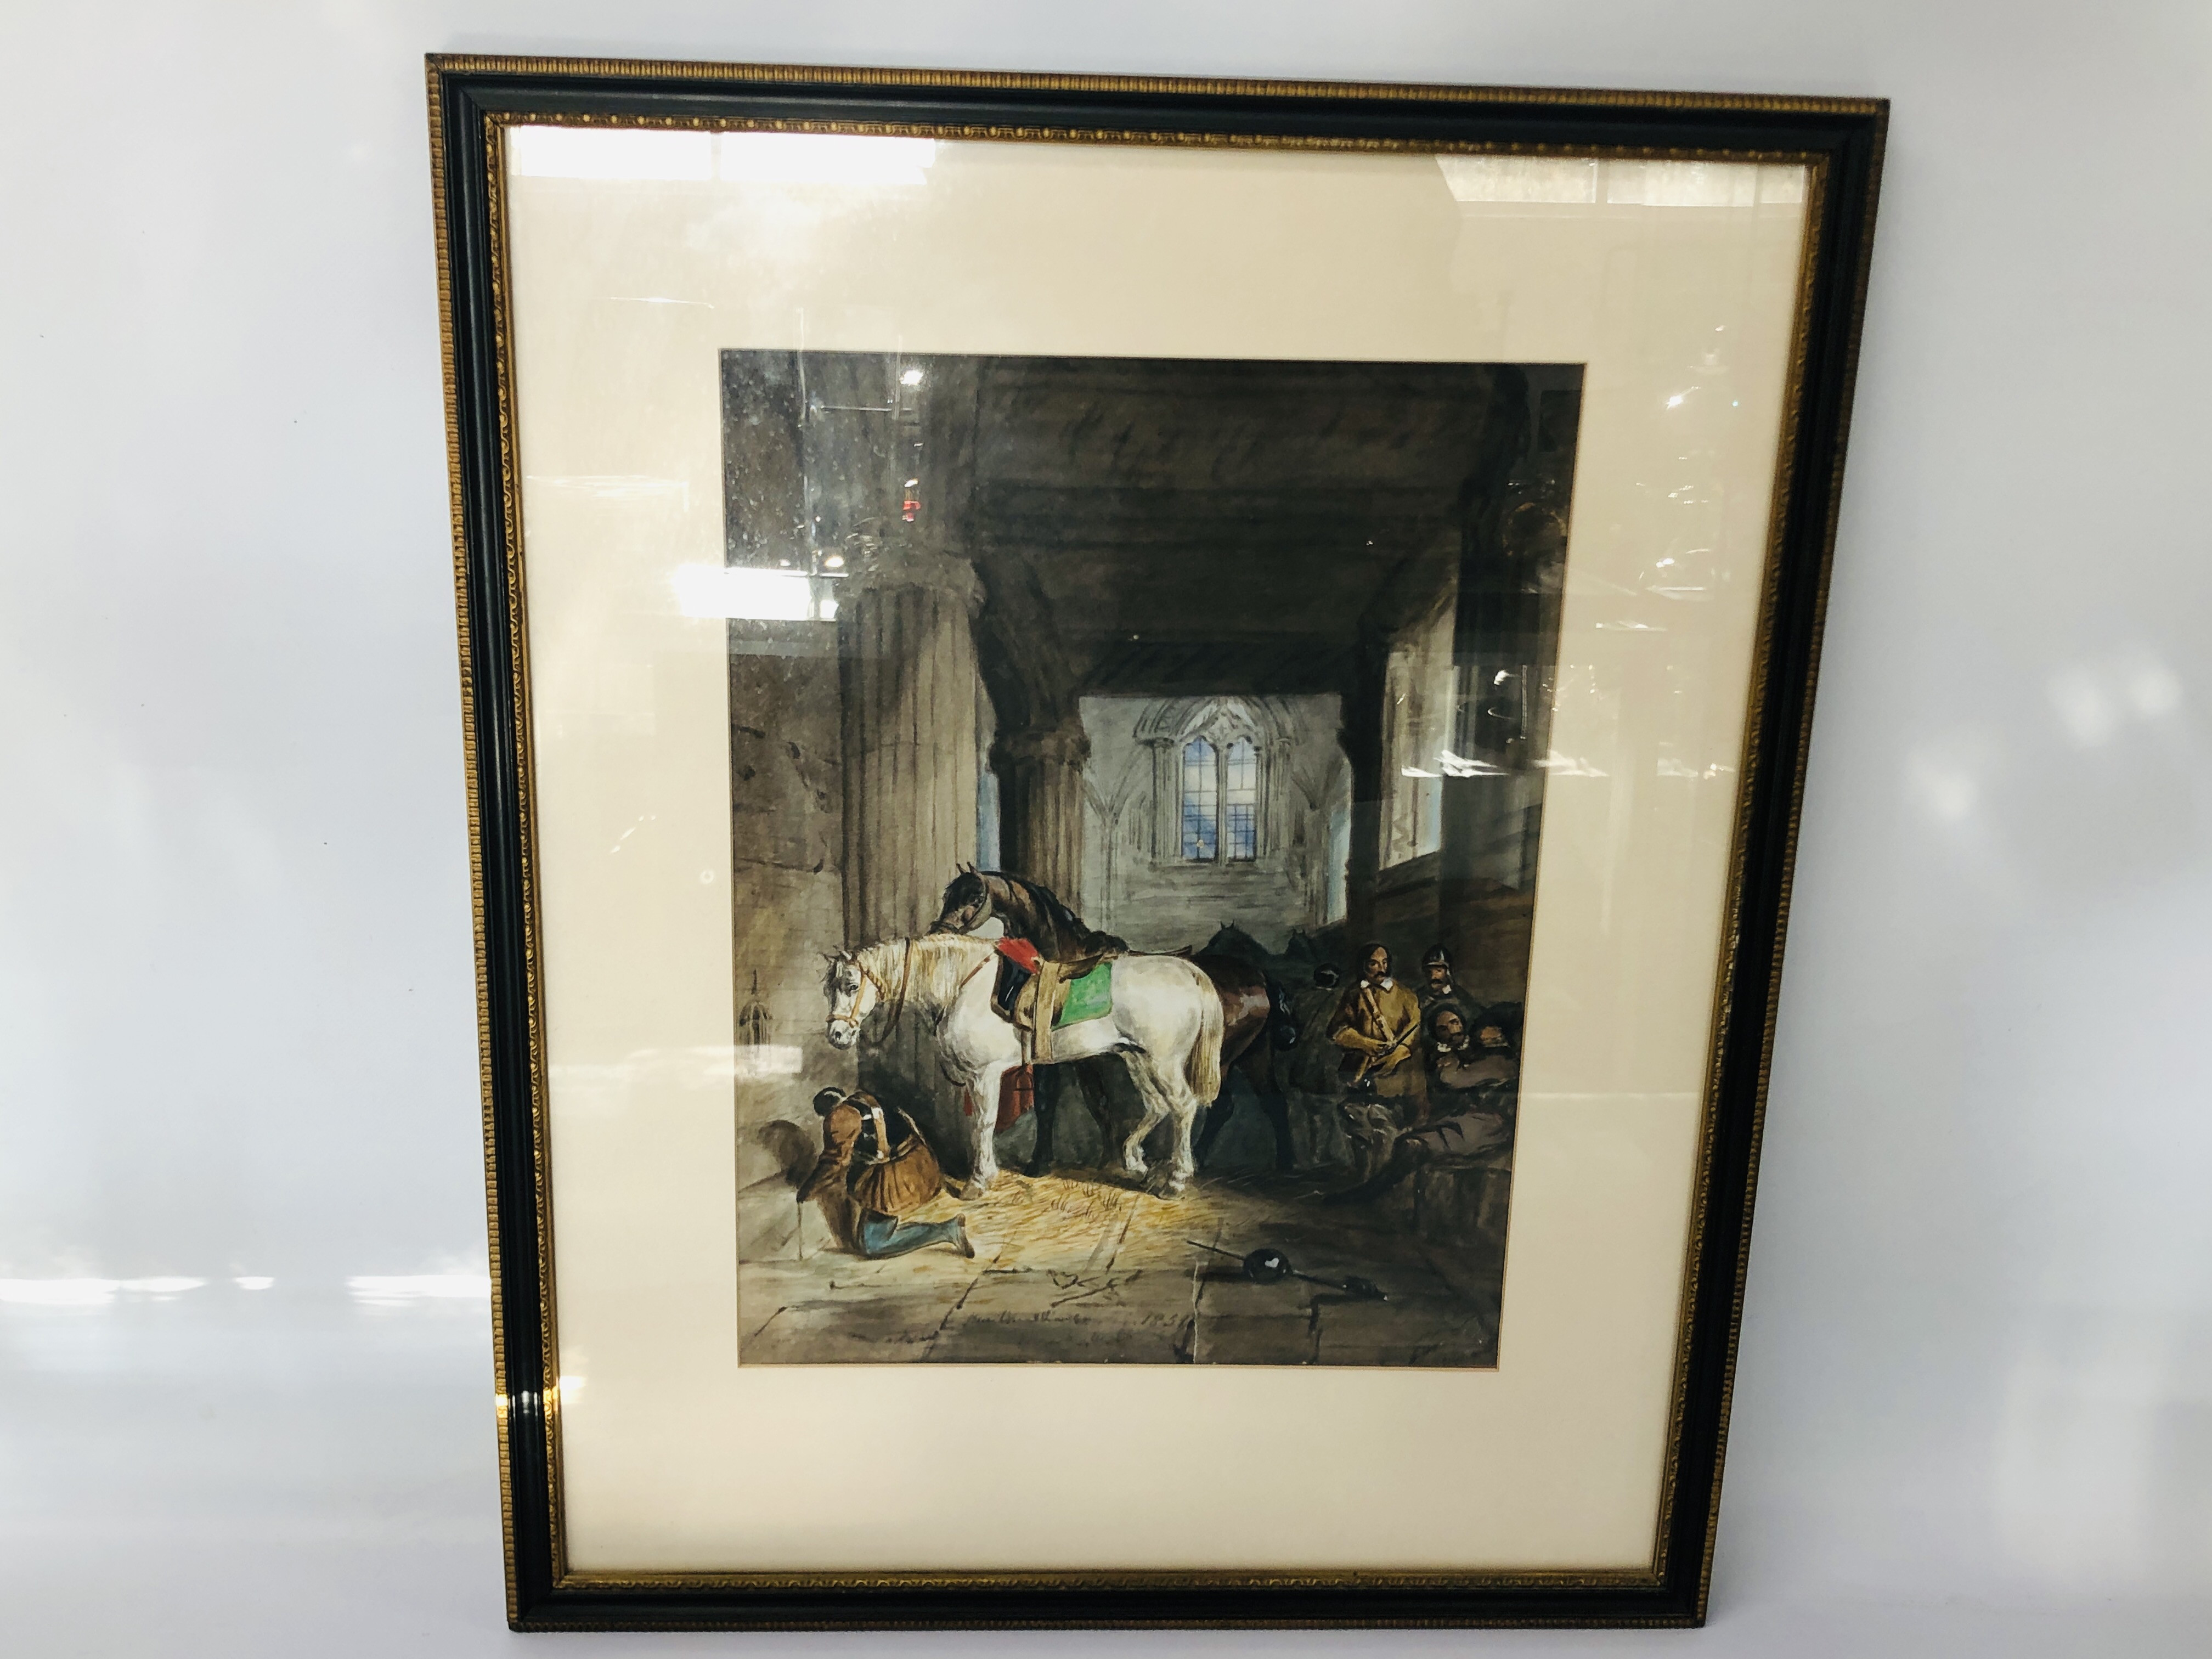 2 FRAMED WATERCOLOURS COLOGNE CATHEDRAL INTERIOR SCENE 45CM X 32CM AND STABLE SCENE 42CM X 32CM - Image 7 of 11